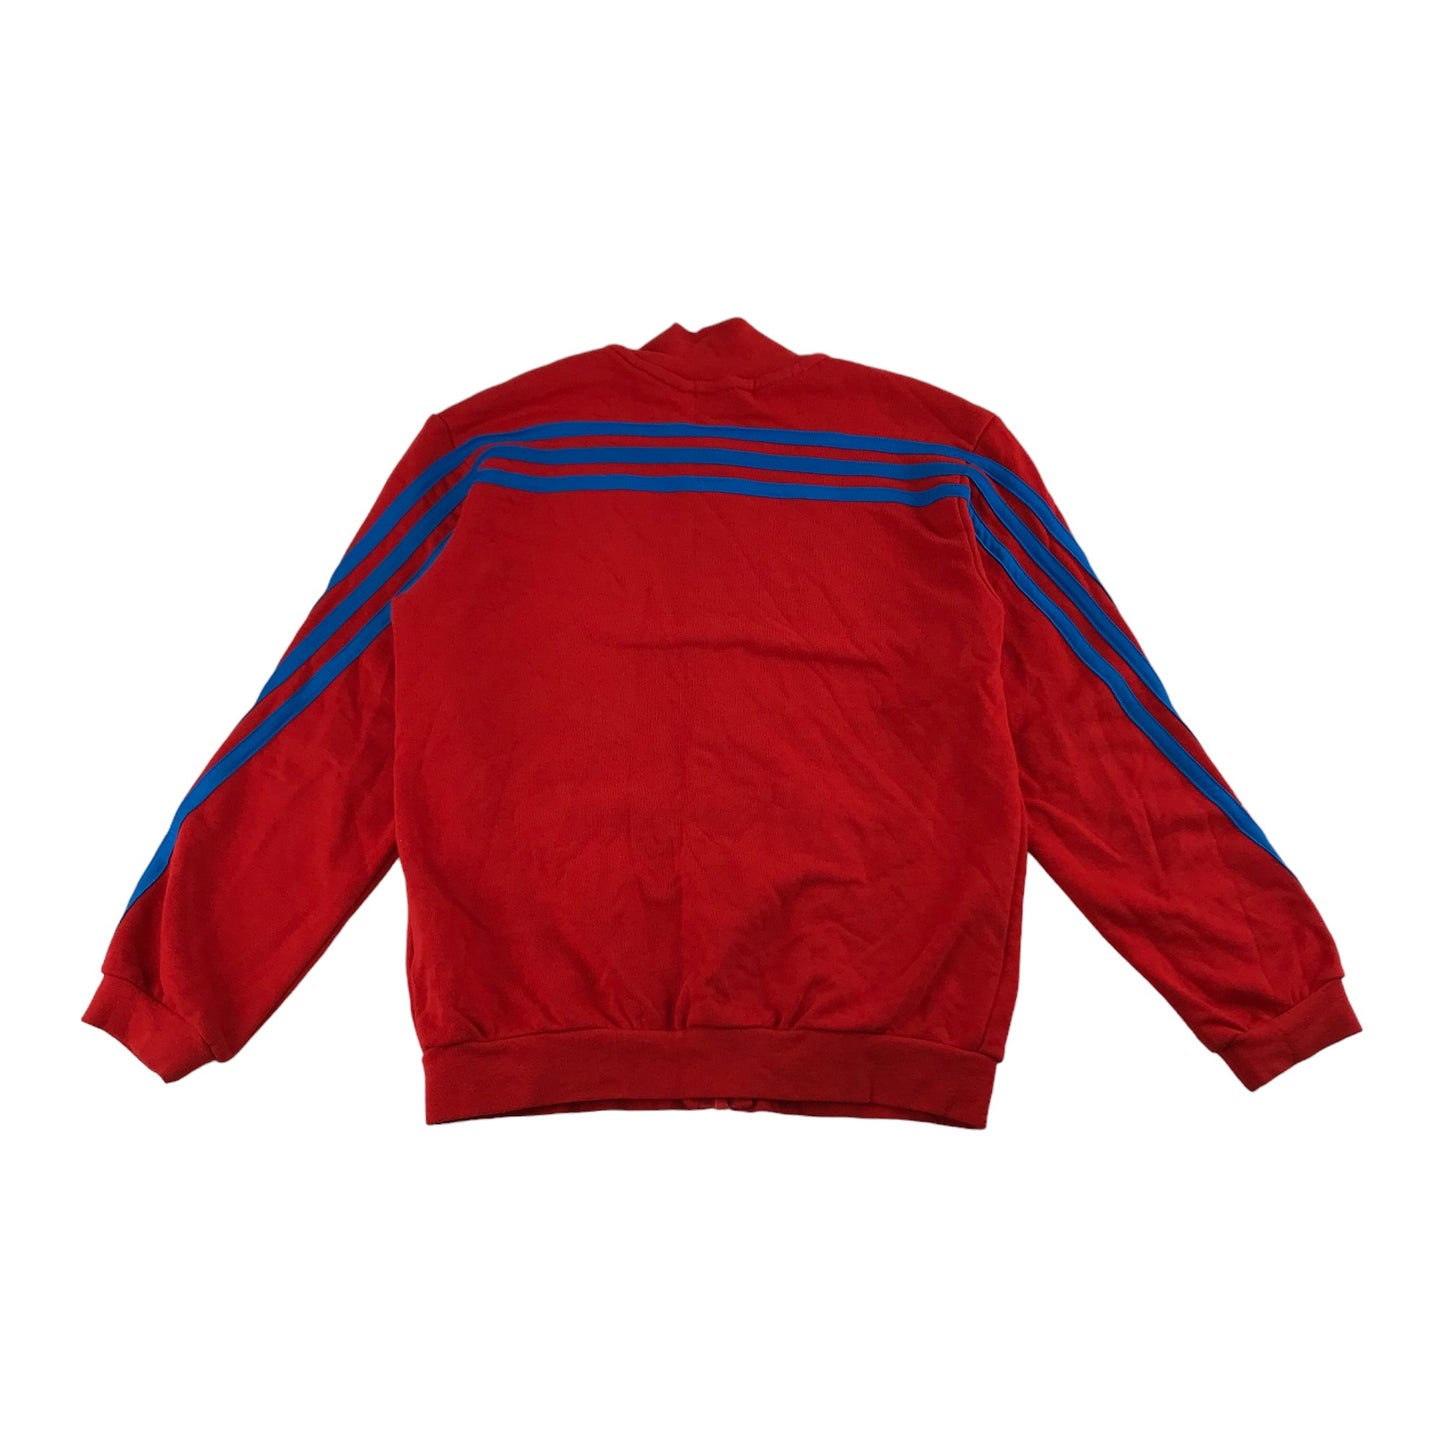 Adidas x LEGO Sweater Age 7 Red Full Zipper Jersey